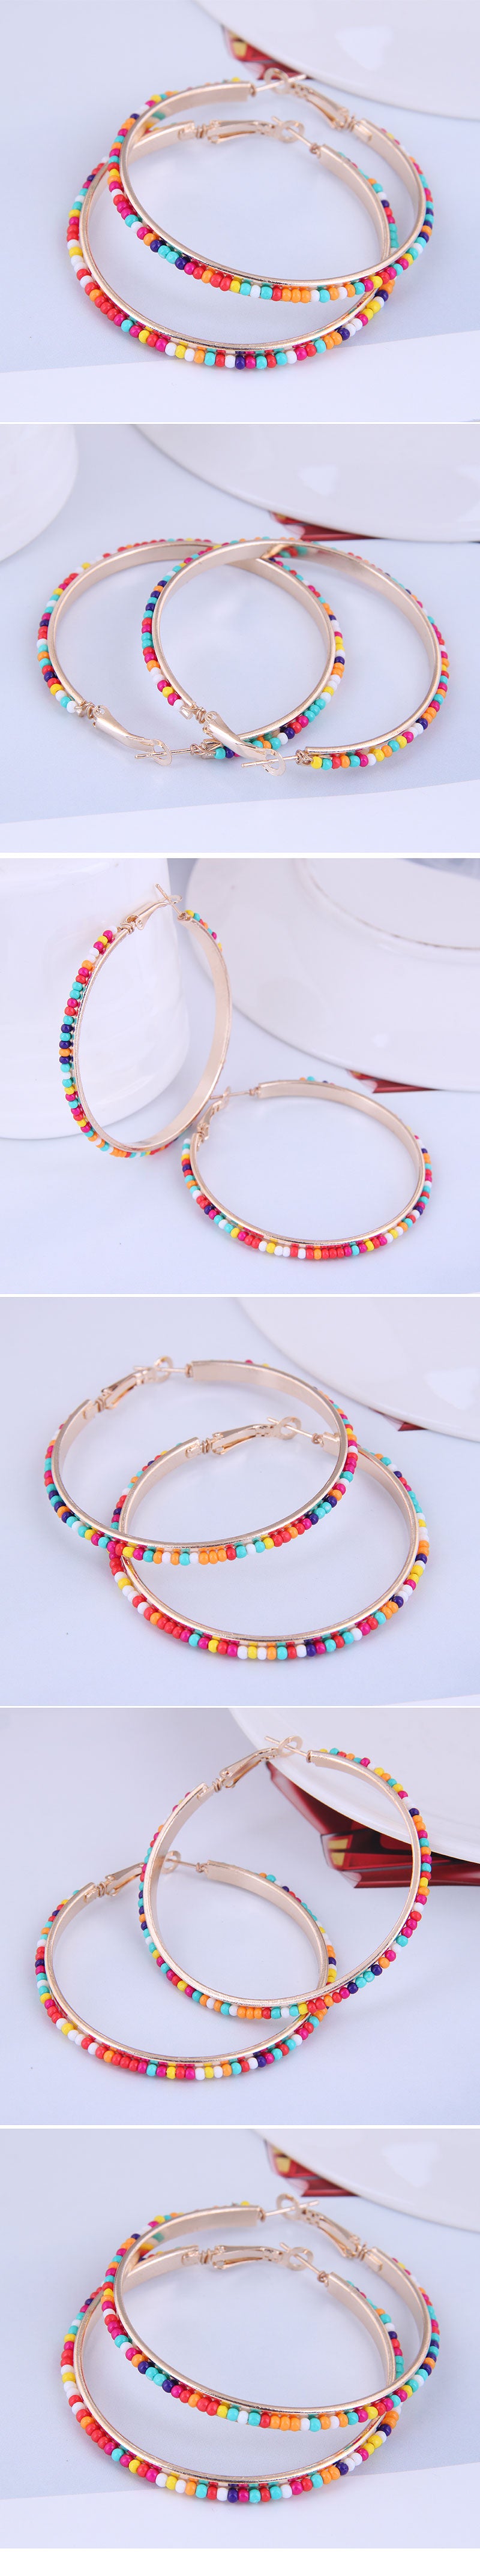 Fashion Concise Rice Beads Large Circle Earrings